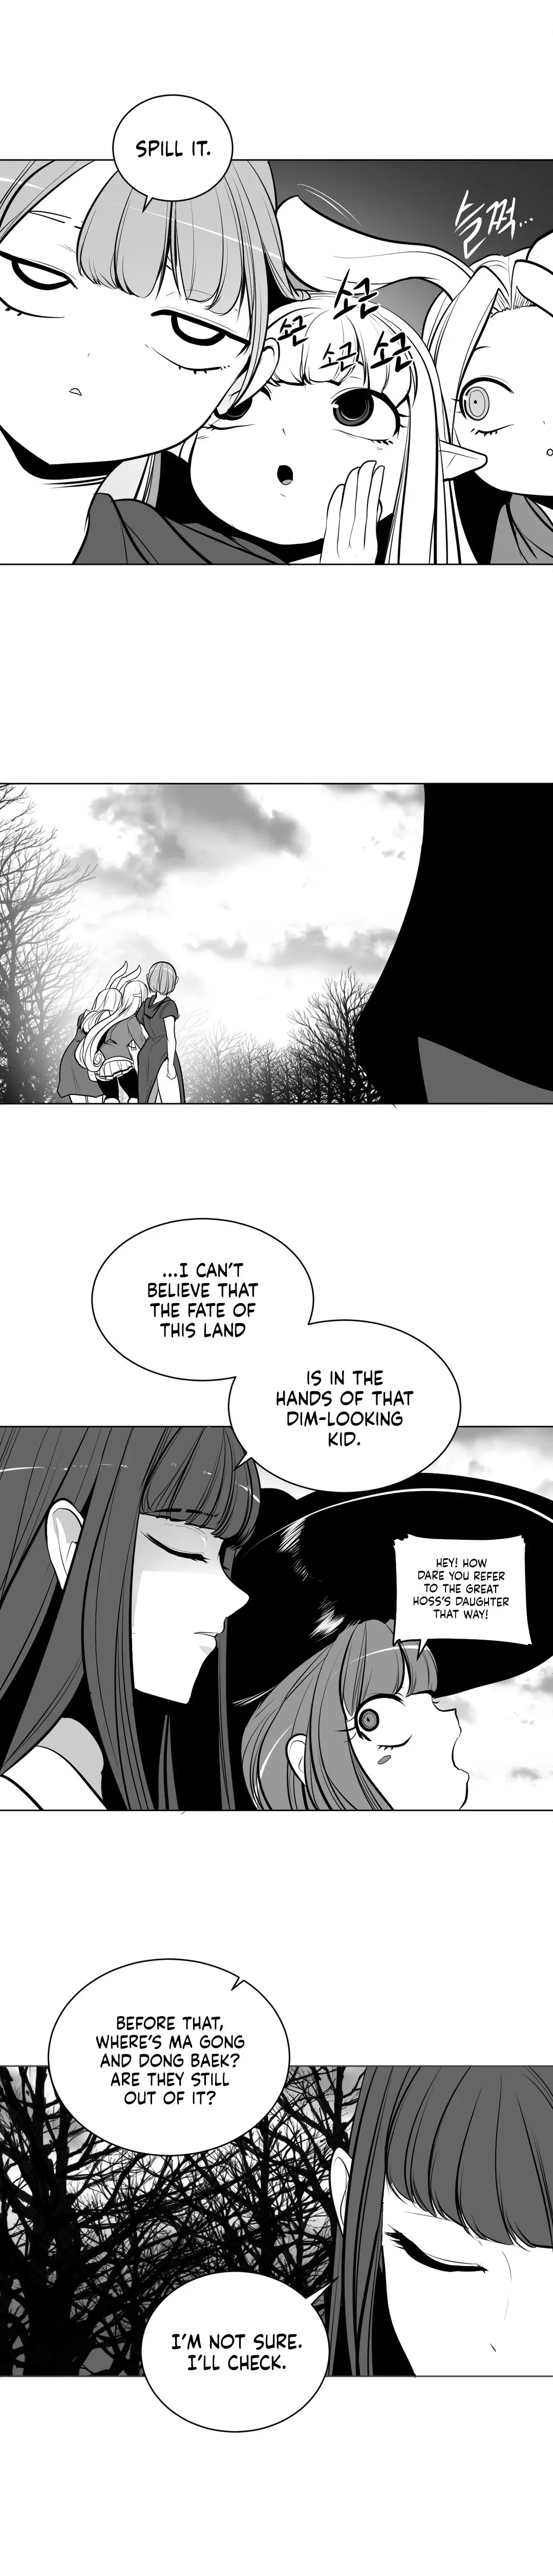 What Happens Inside The Dungeon - 82 page 7-20aebb34